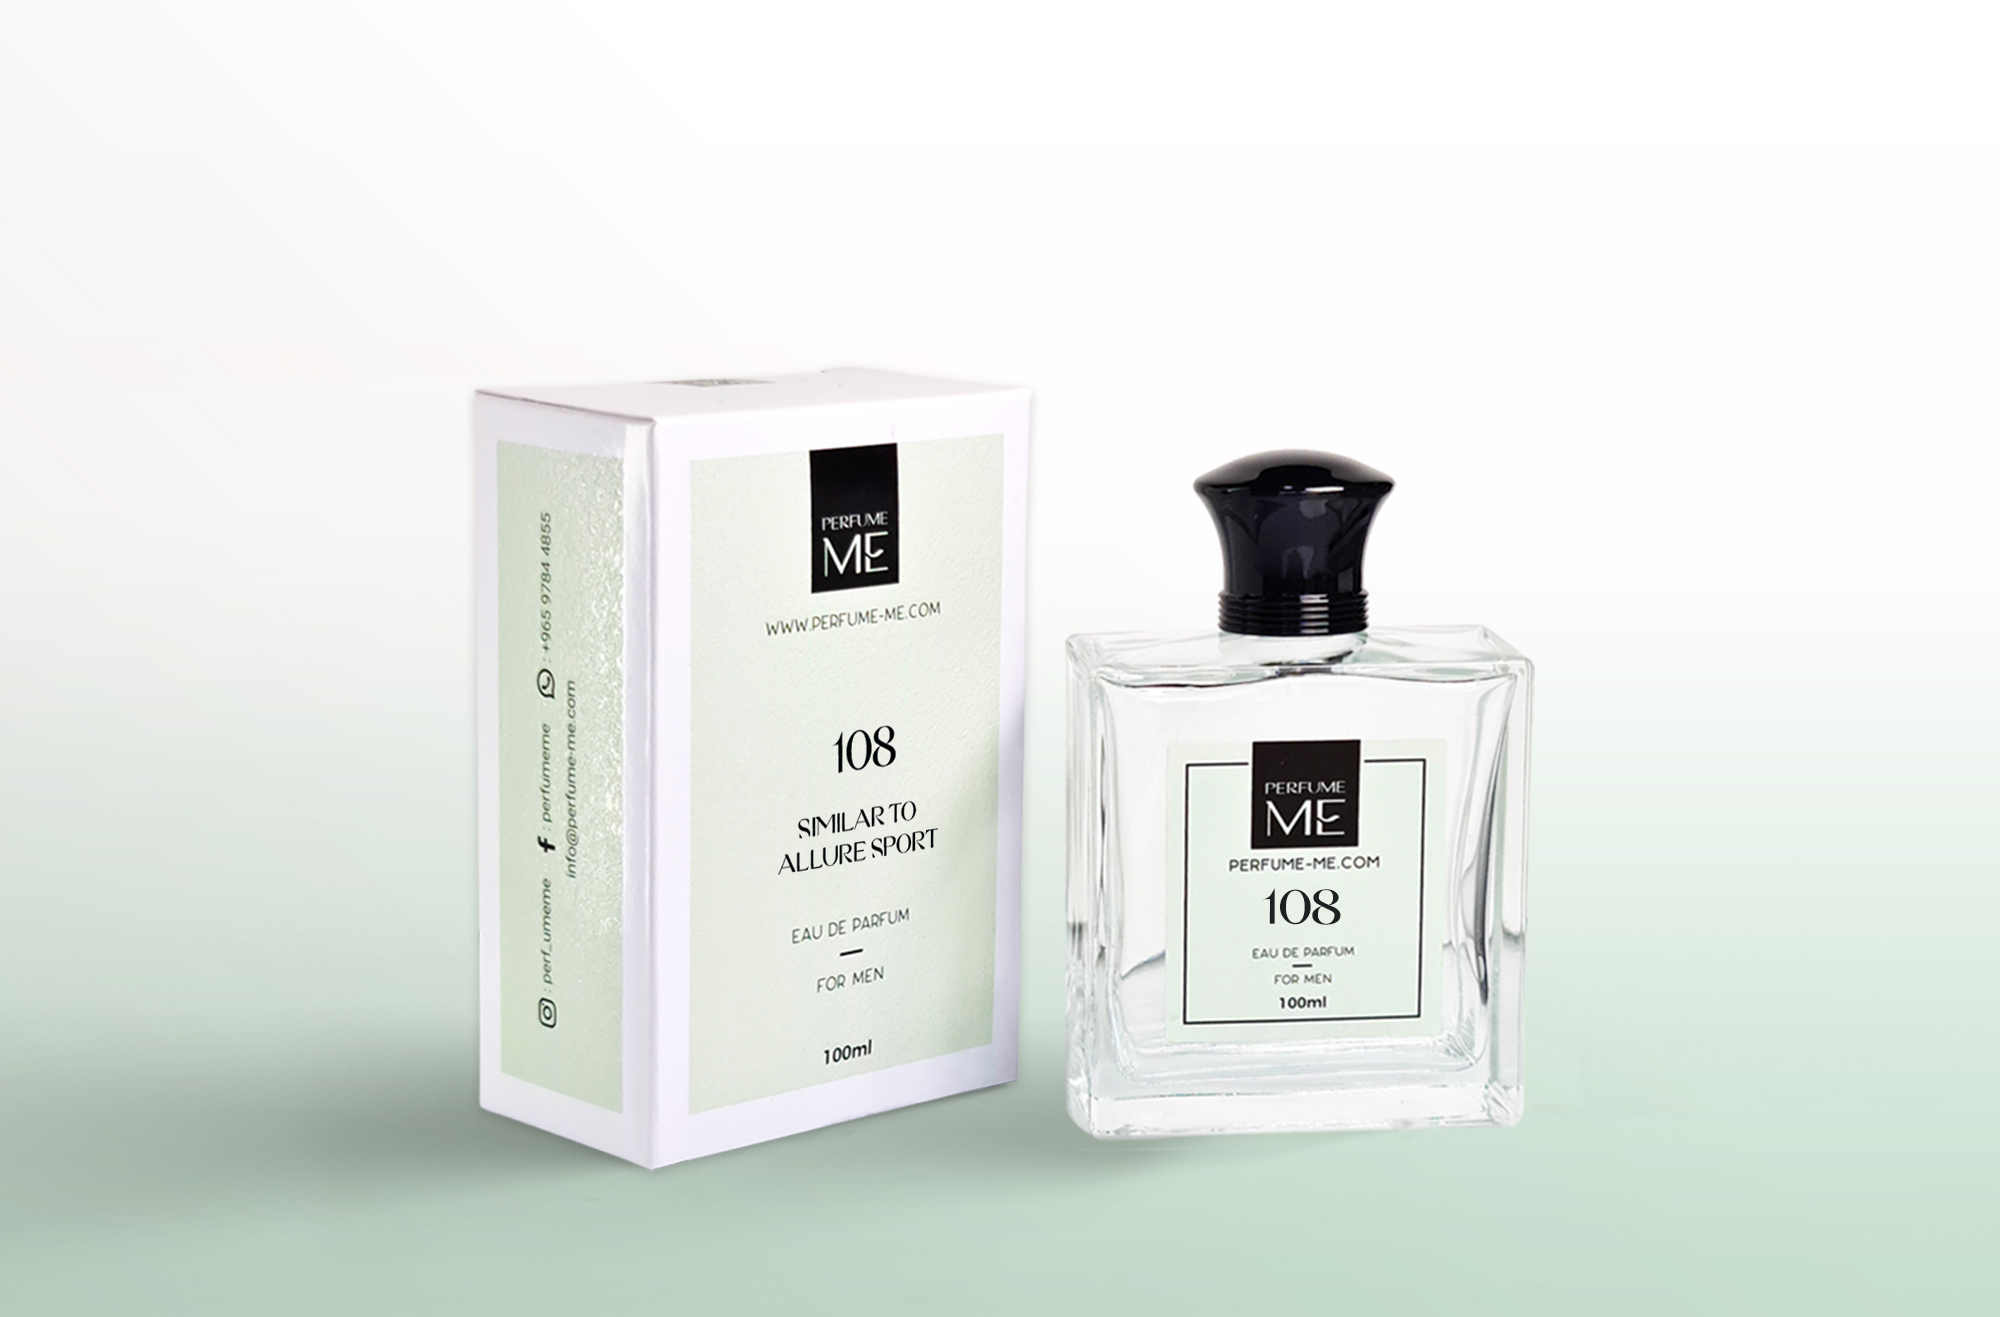 Perfume ME 108: Similar To Allure Sport By Chanel